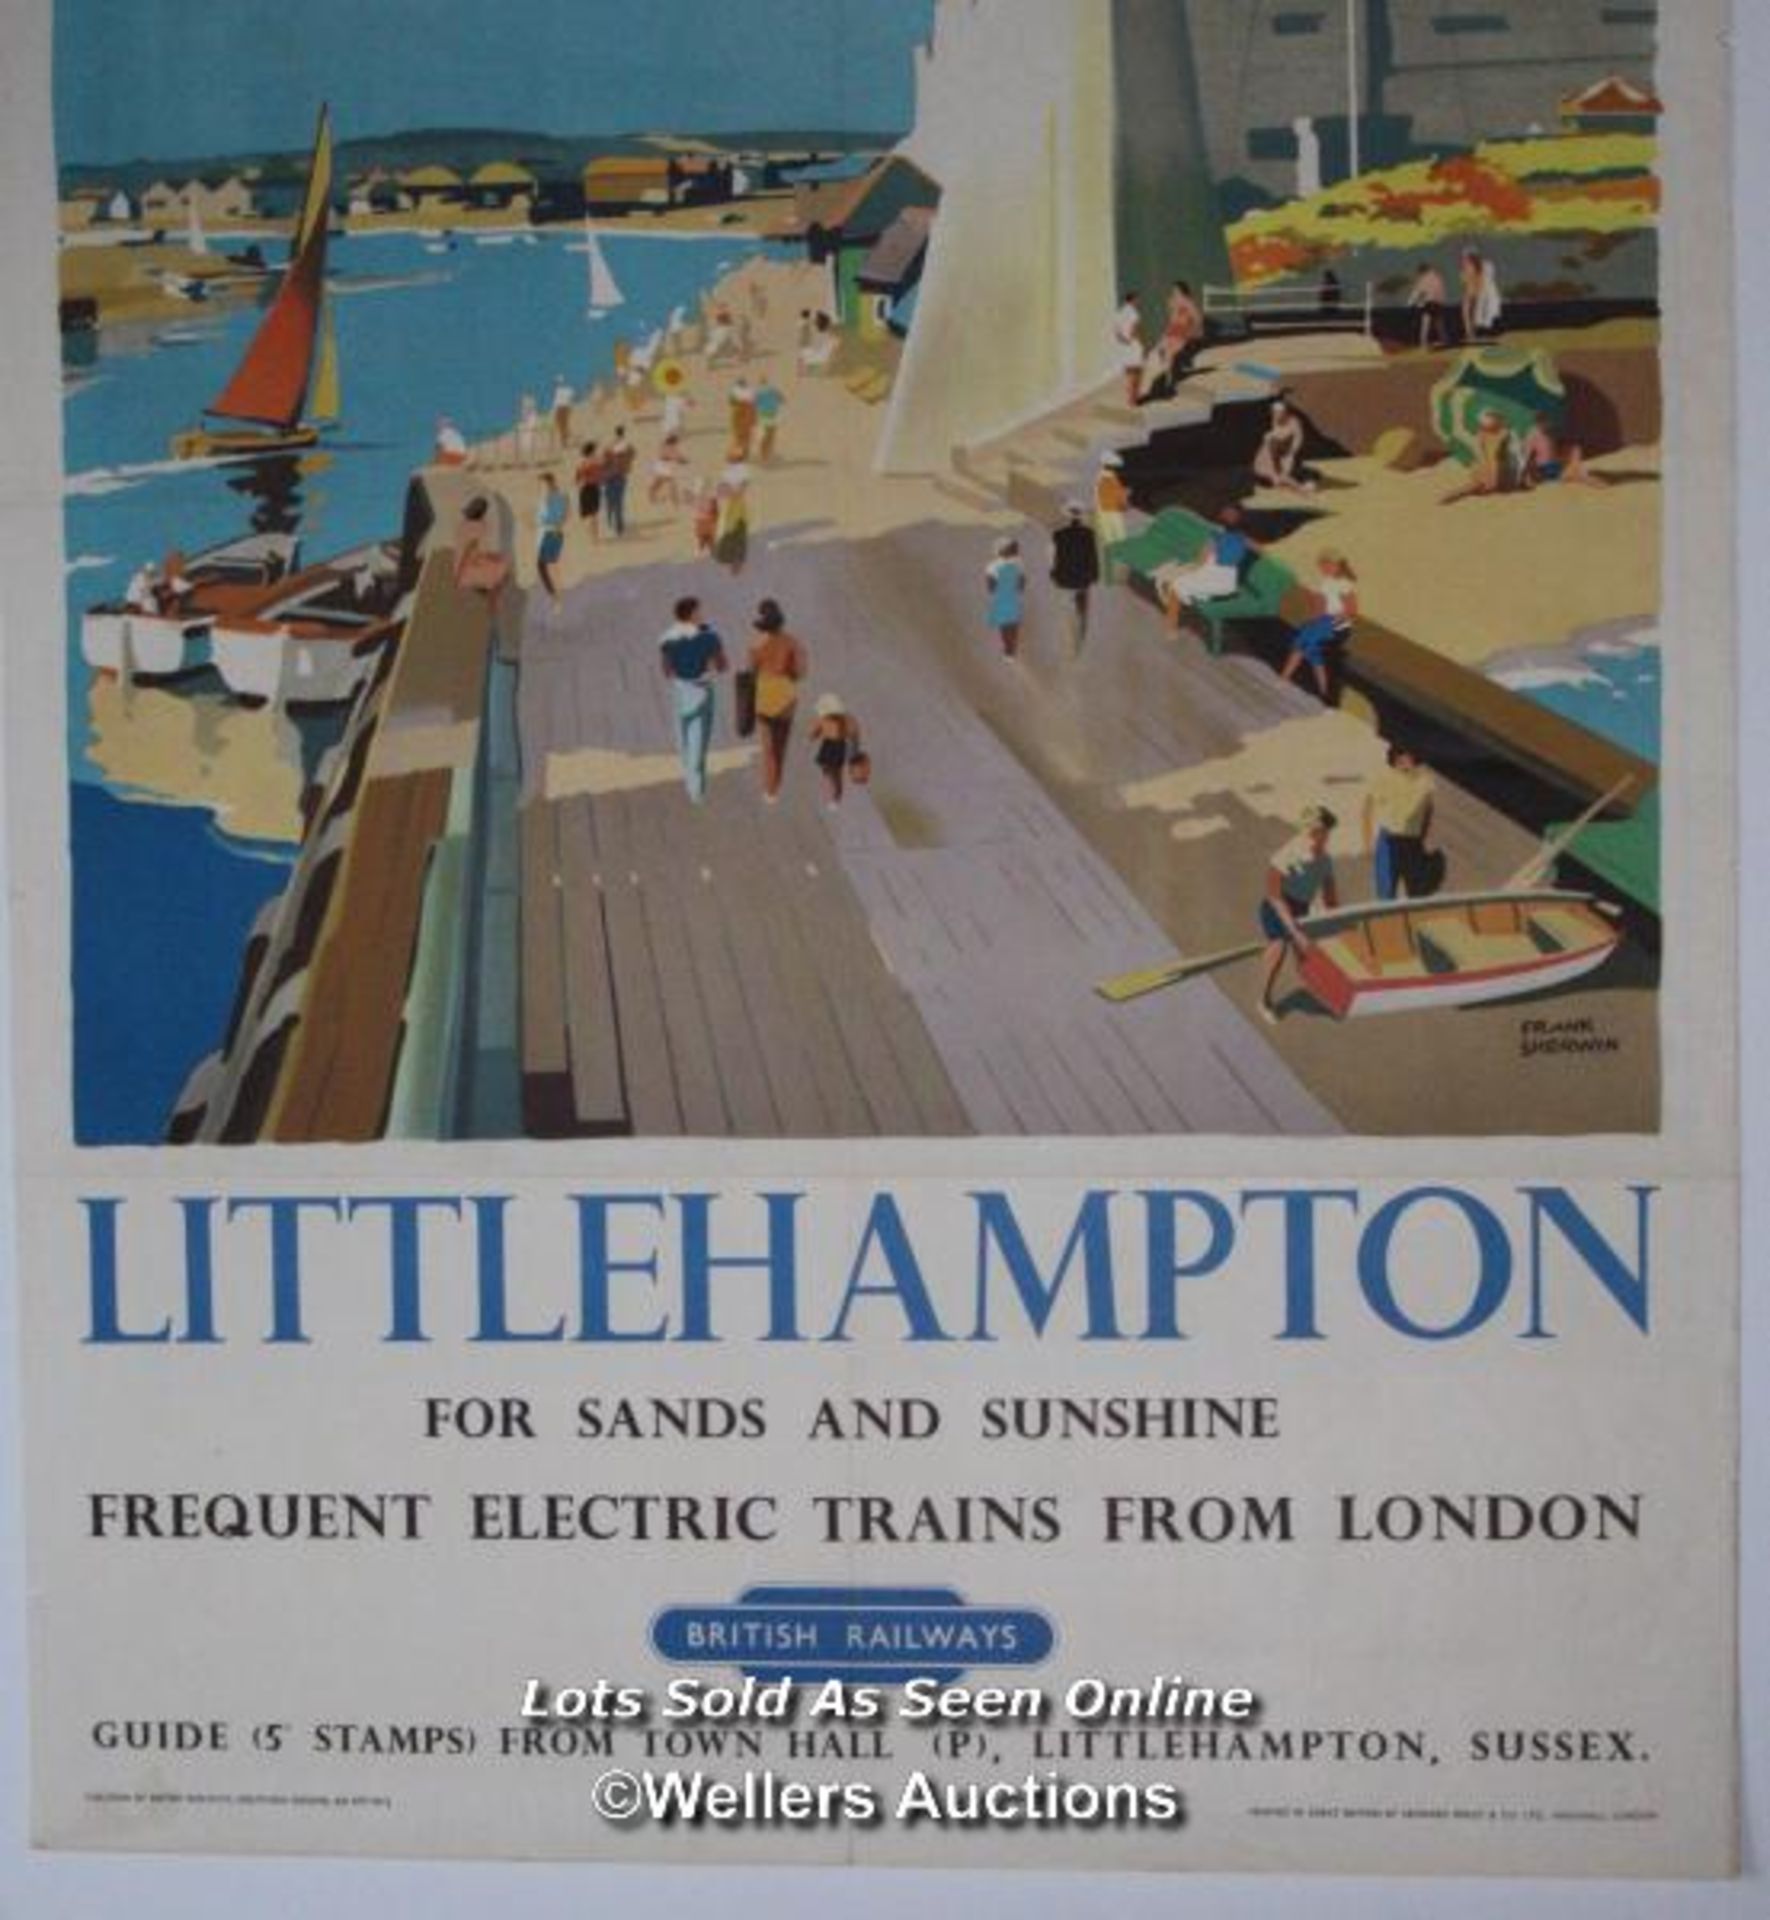 Vintage British Railways poster 'Littlehampton For Sands and Sunshine - Frequent Electric Trains - Image 7 of 9